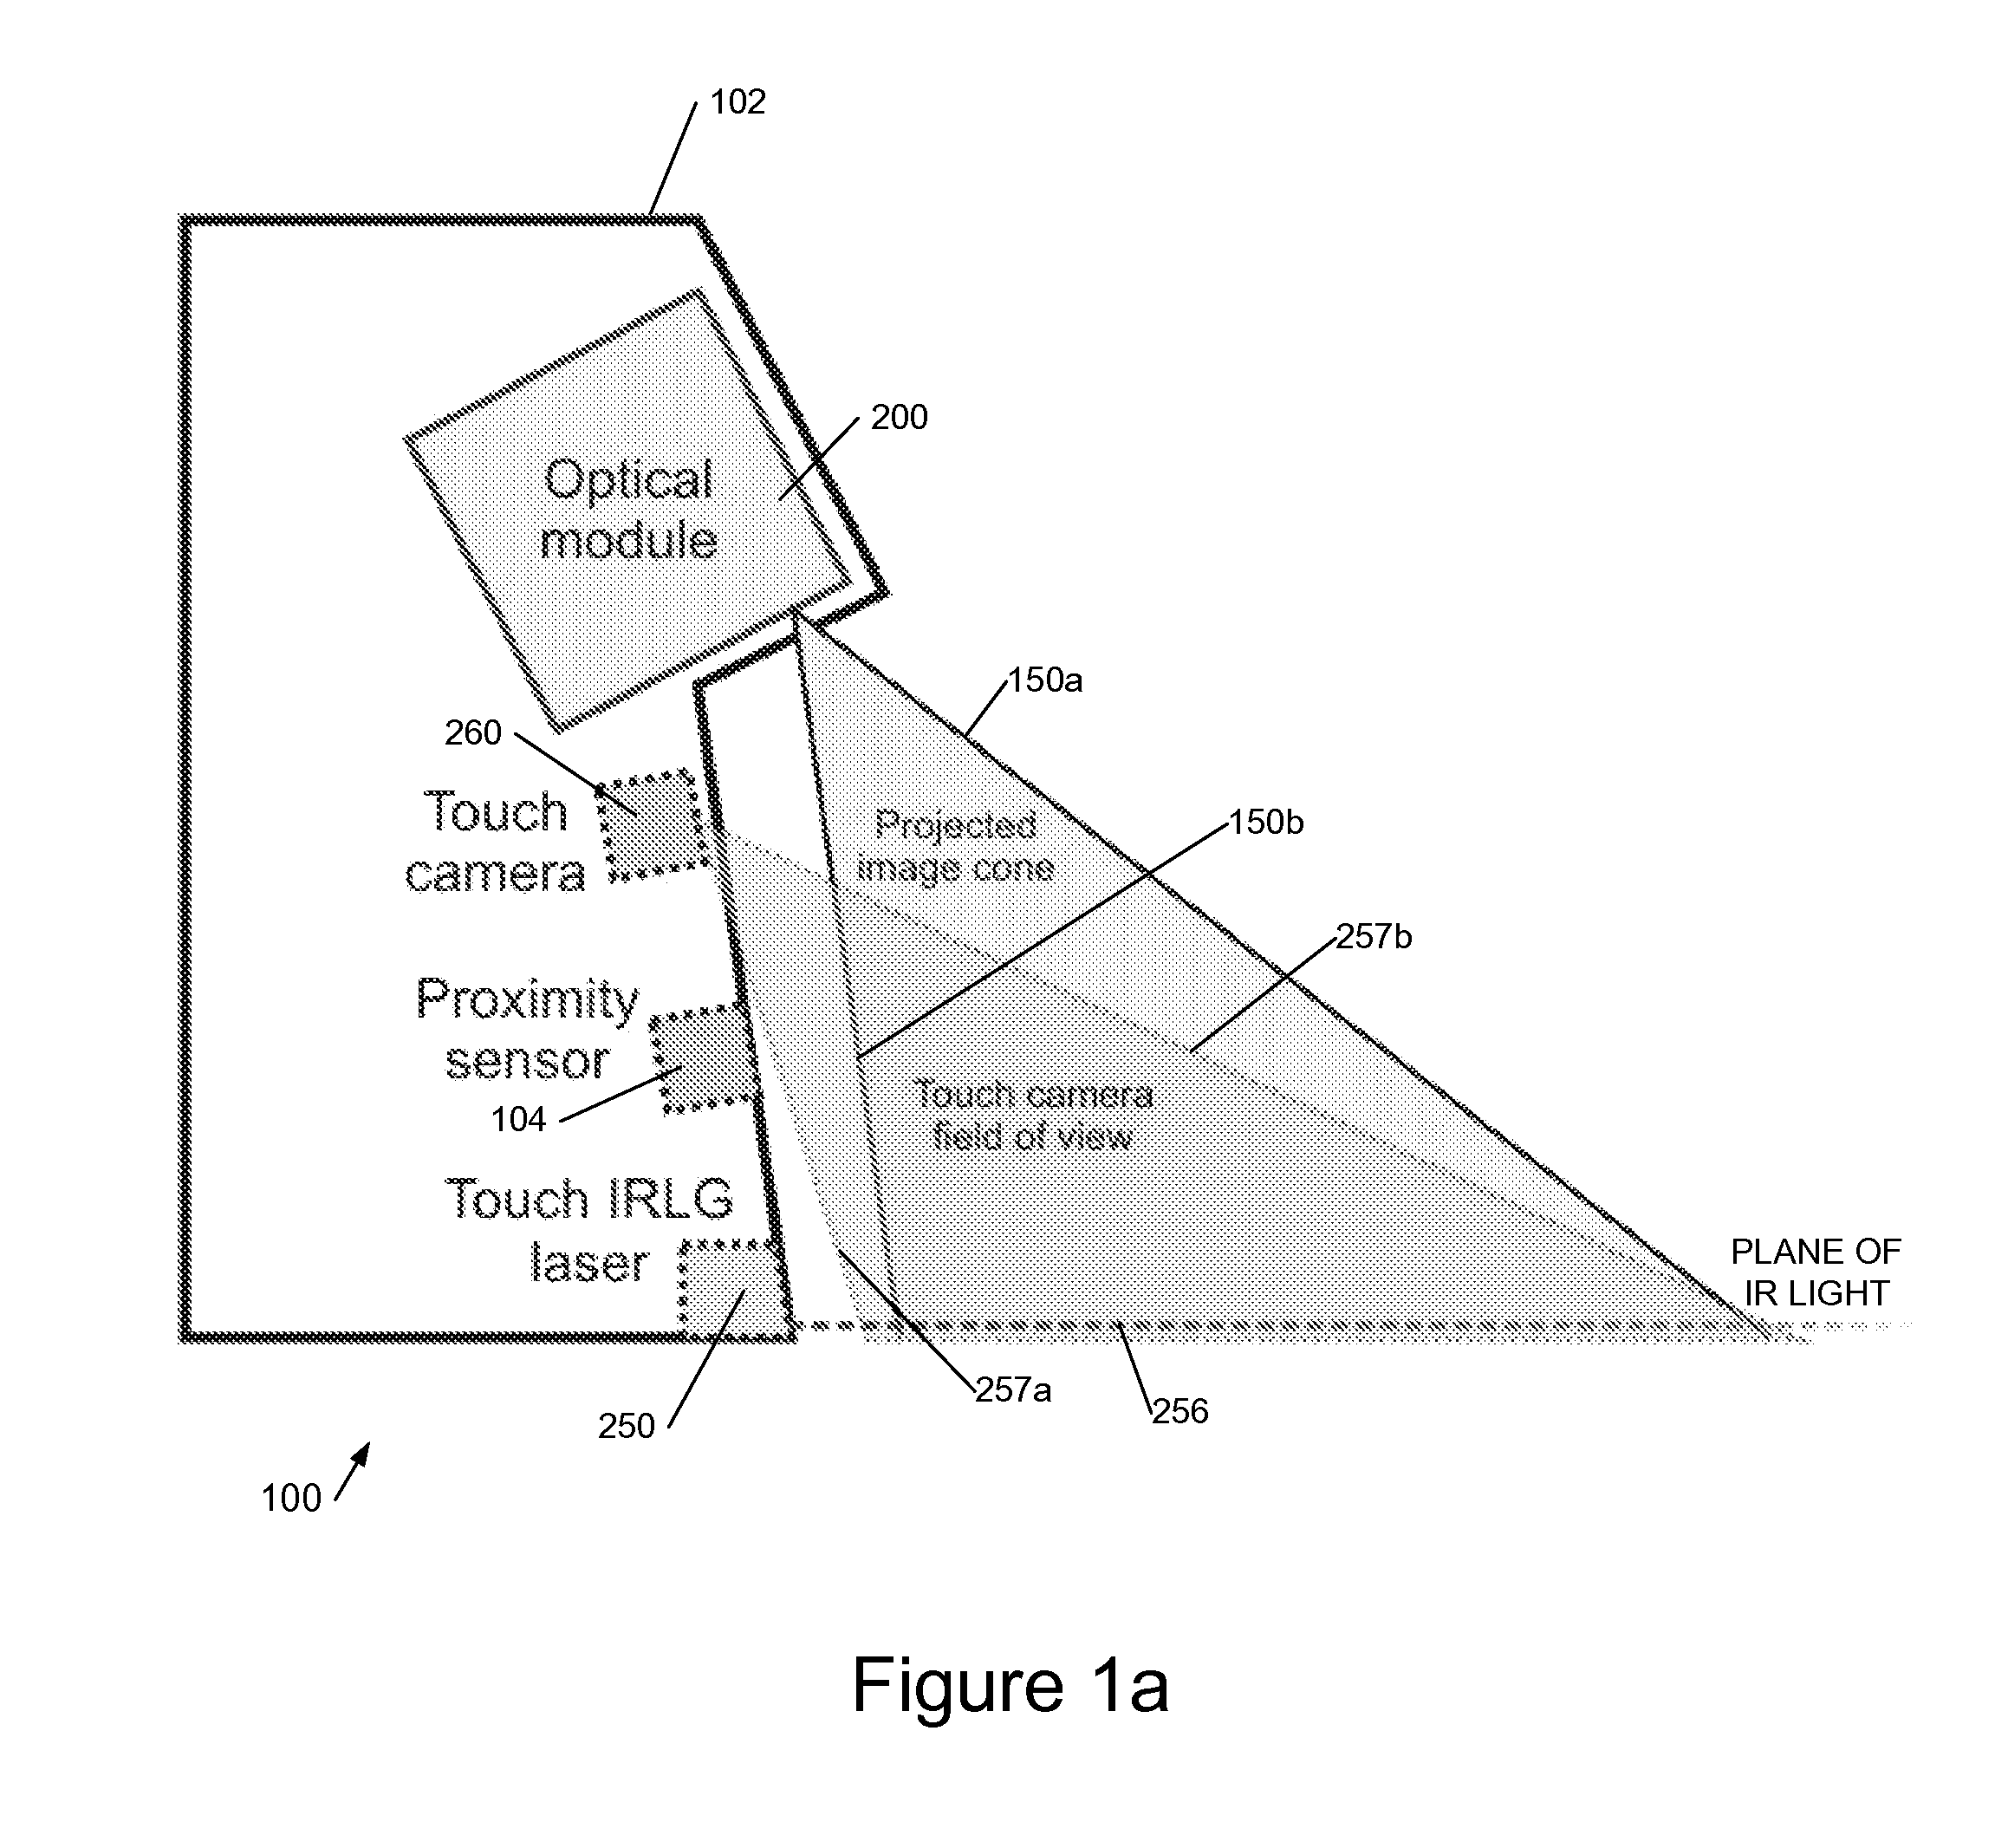 Image display systems